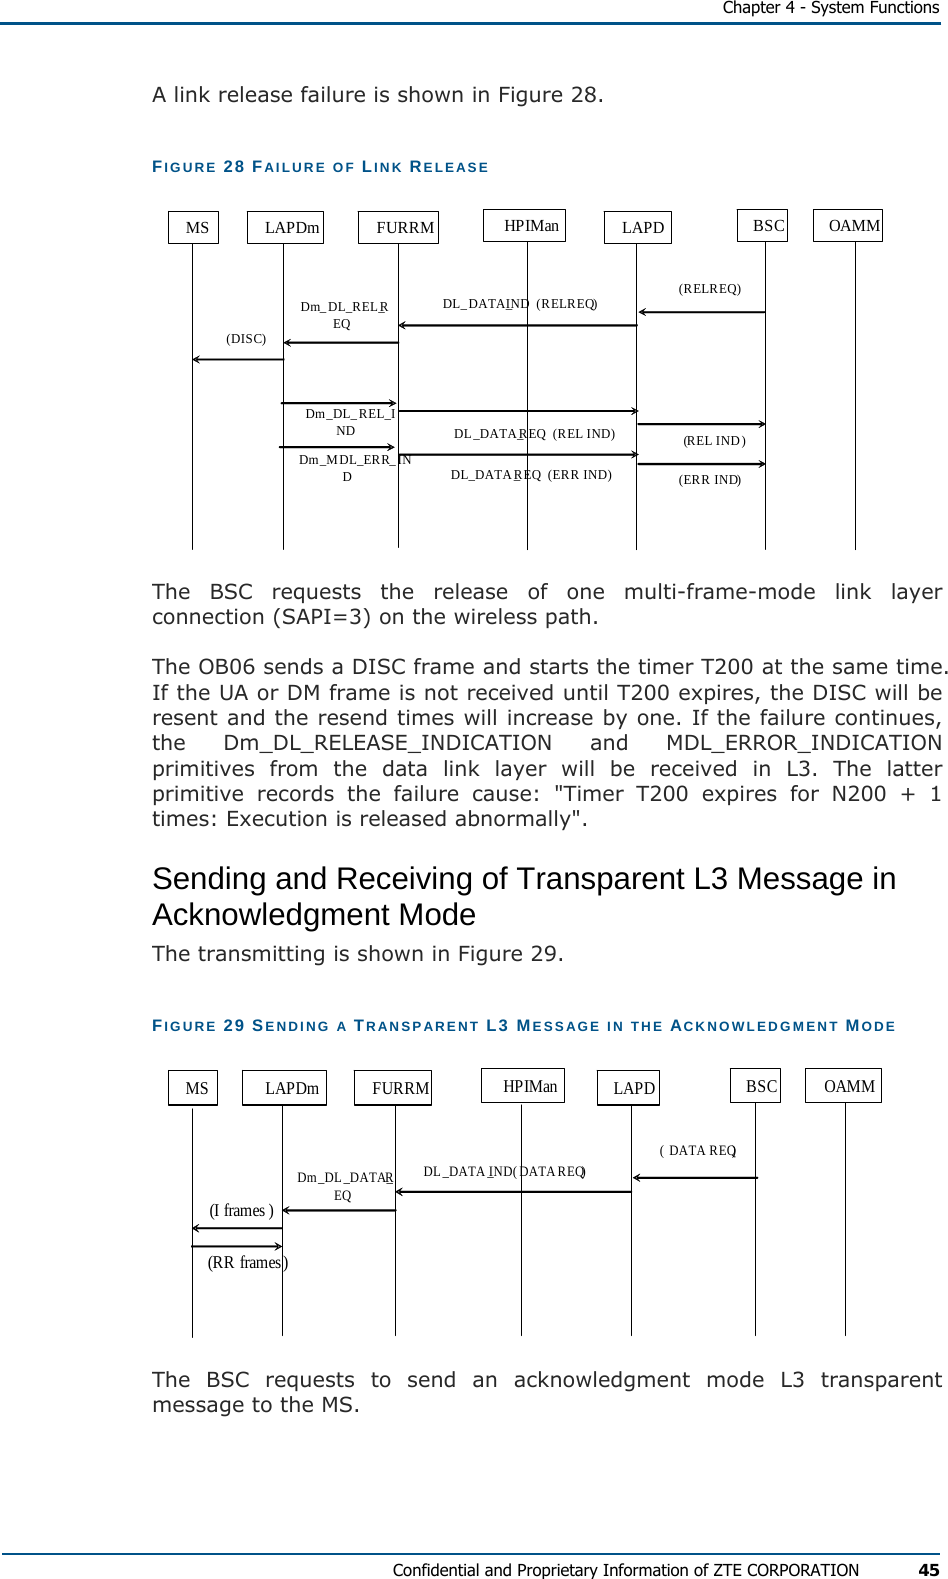   Chapter 4 - System Functions Confidential and Proprietary Information of ZTE CORPORATION 45 A link release failure is shown in Figure 28. FIGURE 28 FAILURE OF LINK RELEASE MS LAPDm FURRM HPIMan LAPD BSC OAMMDm_DL_REL_REQDL_DATA_IND  (REL REQ) (REL REQ) (DISC)Dm_DL_REL_IND DL_DATA_REQ  (REL IND) (REL IND ) Dm_MDL_ERR_INDDL_DATA_REQ  (ERR IND) (ERR IND)  The BSC requests the release of one multi-frame-mode link layer connection (SAPI=3) on the wireless path. The OB06 sends a DISC frame and starts the timer T200 at the same time. If the UA or DM frame is not received until T200 expires, the DISC will be resent and the resend times will increase by one. If the failure continues, the Dm_DL_RELEASE_INDICATION and MDL_ERROR_INDICATION primitives from the data link layer will be received in L3. The latter primitive records the failure cause: &quot;Timer T200 expires for N200 + 1 times: Execution is released abnormally&quot;. Sending and Receiving of Transparent L3 Message in Acknowledgment Mode The transmitting is shown in Figure 29. FIGURE 29 SENDING A TRANSPARENT L3 MESSAGE IN THE ACKNOWLEDGMENT MODE MS LAPDm FURRM HPIMan LAPD BSC OAMMDm_DL_DATA_REQ(DATA REQ) (I frames )(RR frames)DL_DATA_IND (DATAREQ) The BSC requests to send an acknowledgment mode L3 transparent message to the MS. 